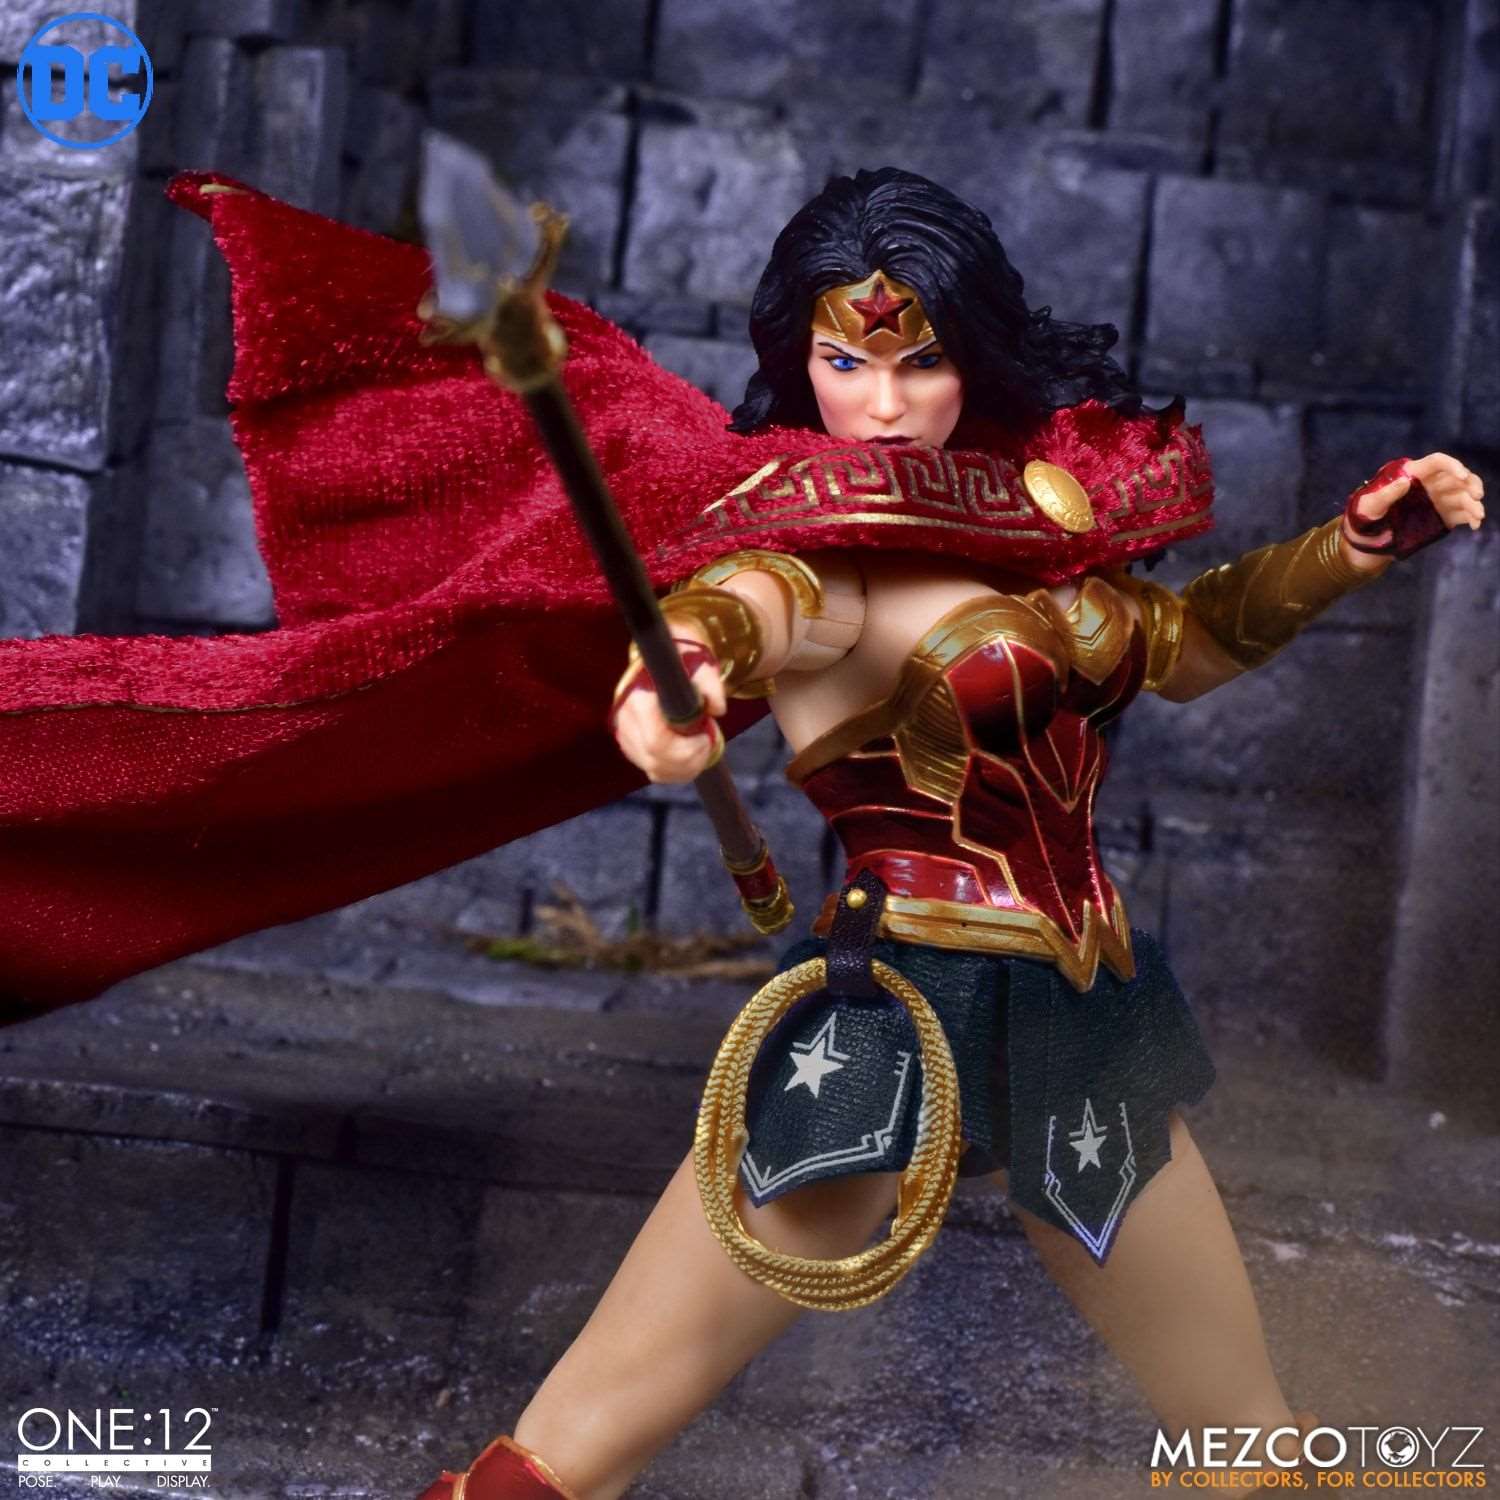 Mezco One:12 DC Universe Wonder Woman figure with spear and cape